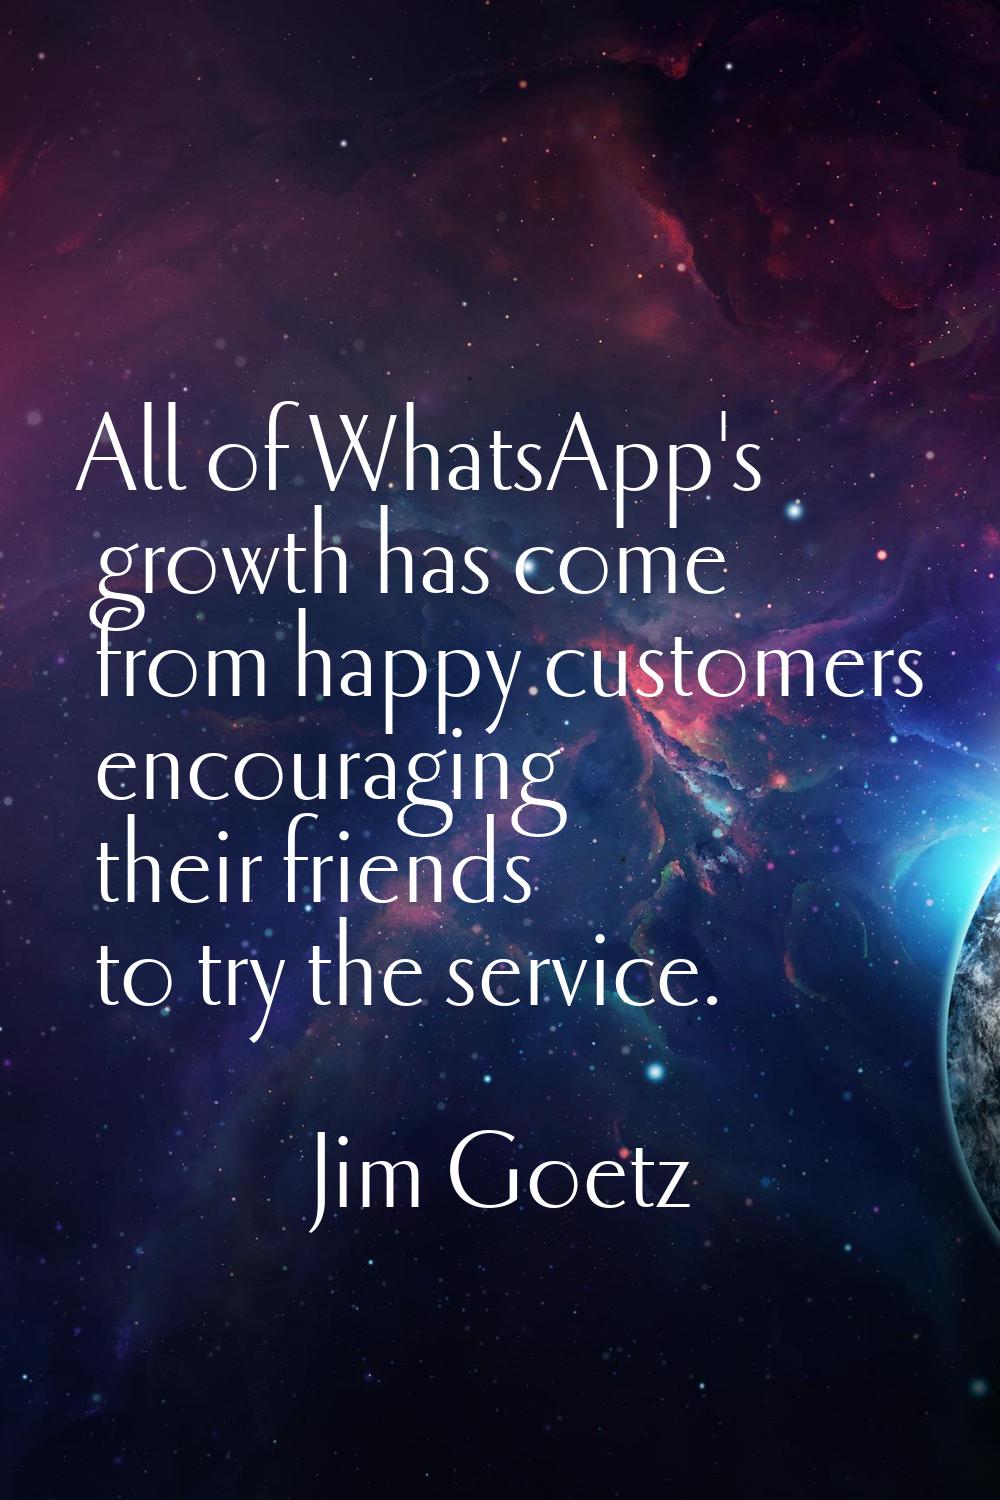 All of WhatsApp's growth has come from happy customers encouraging their friends to try the service